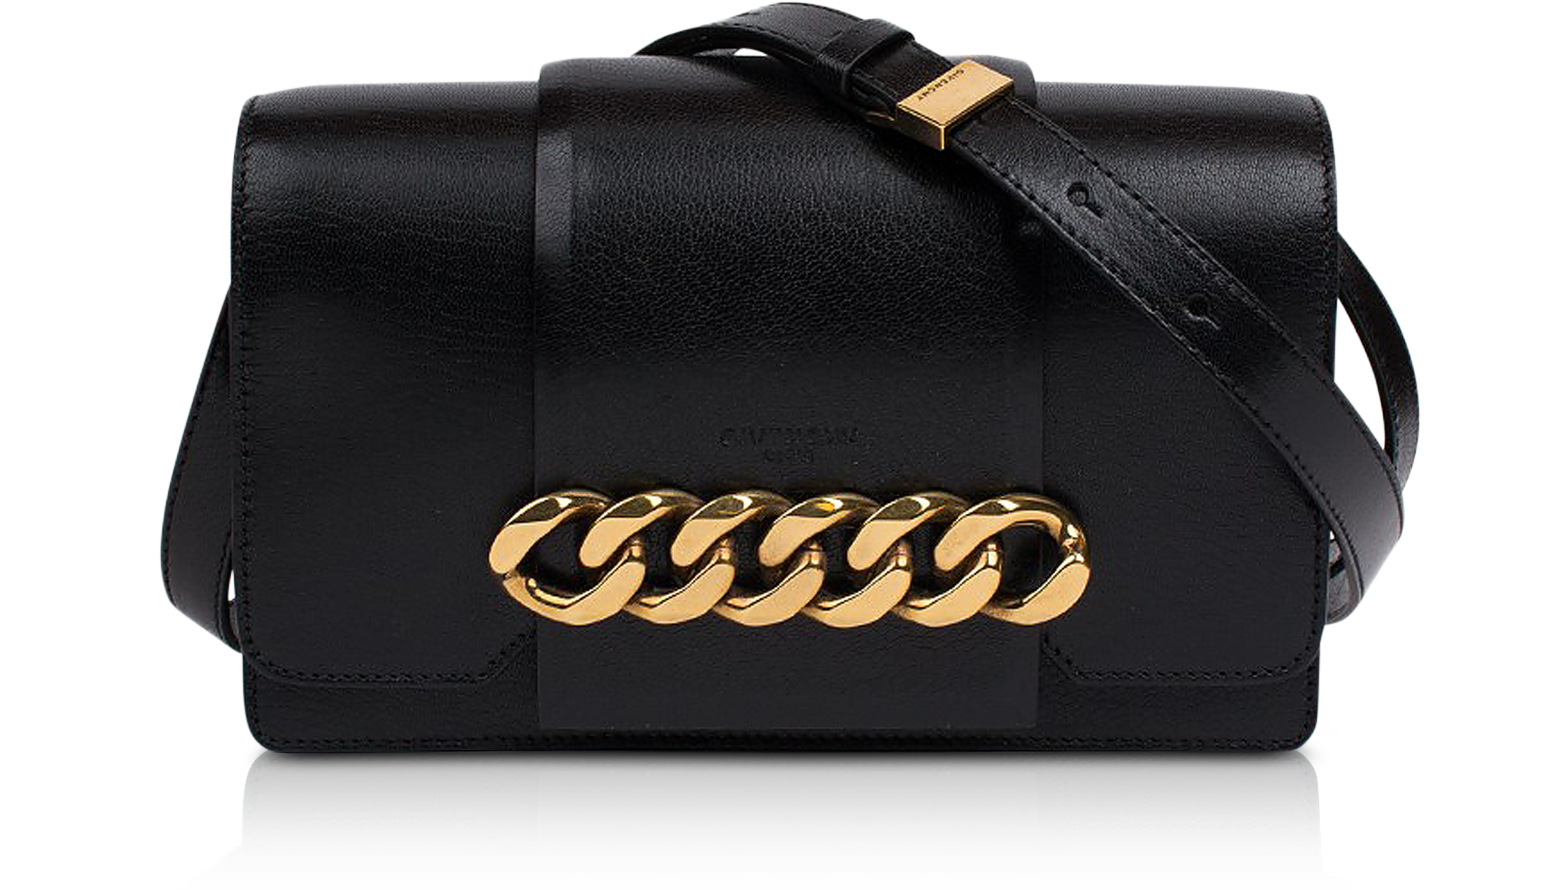 Black Leather Infinity Clutch w/Detachable Shoulder Strap - Givenchy